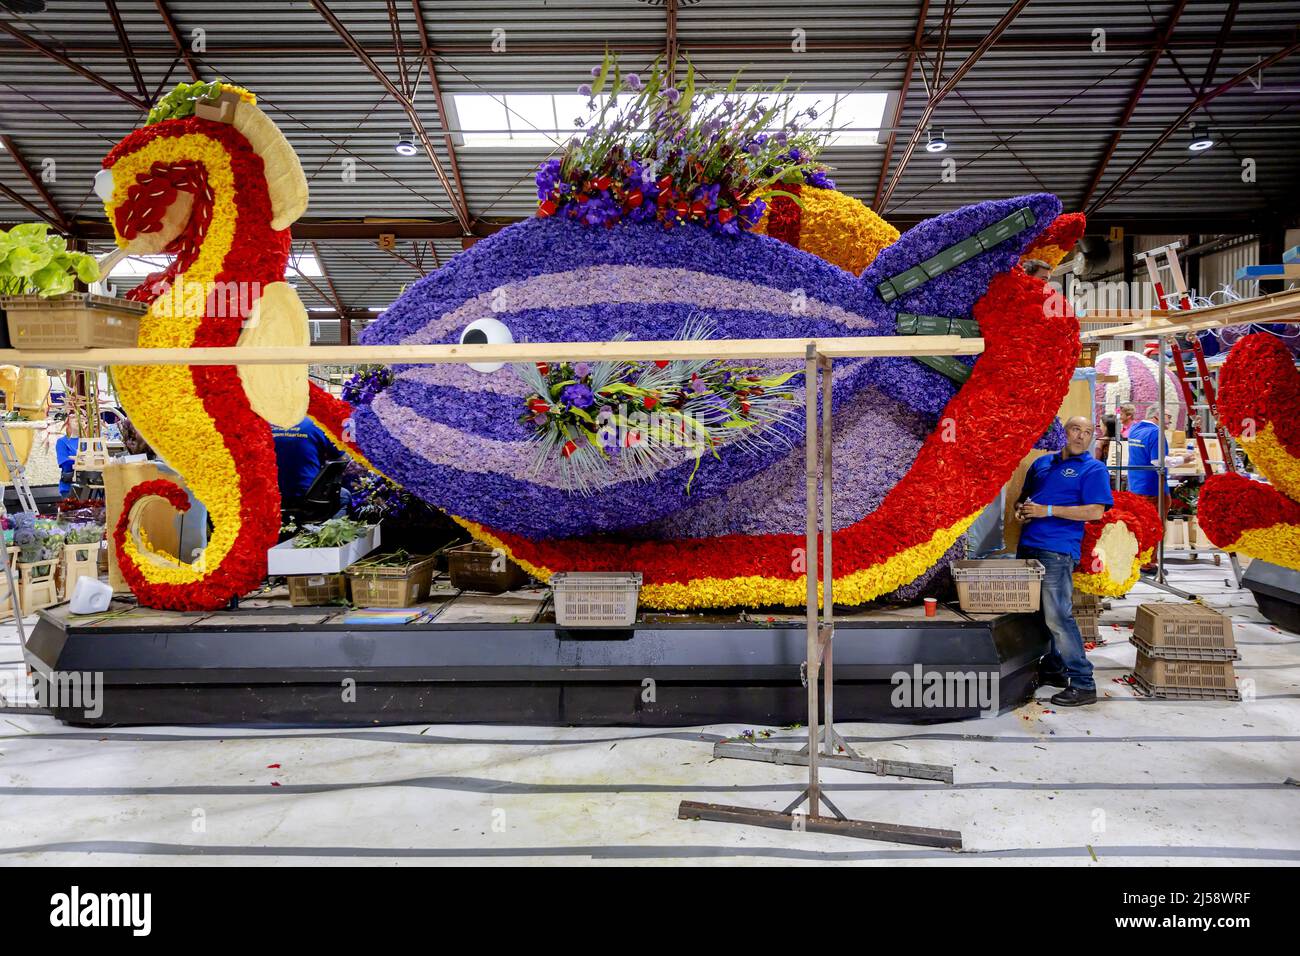 2022-04-21 14:46:54 SASSENHEIM - Flower cutters at work on floats, floats decorated with flowers, which are being built for the annual Flower Parade of the Bollenstreek. The colorful parade will travel from Noordwijk to Haarlem for the 75th time this year. ANP ROBIN VAN LONKHUIJSEN netherlands out - belgium out Stock Photo